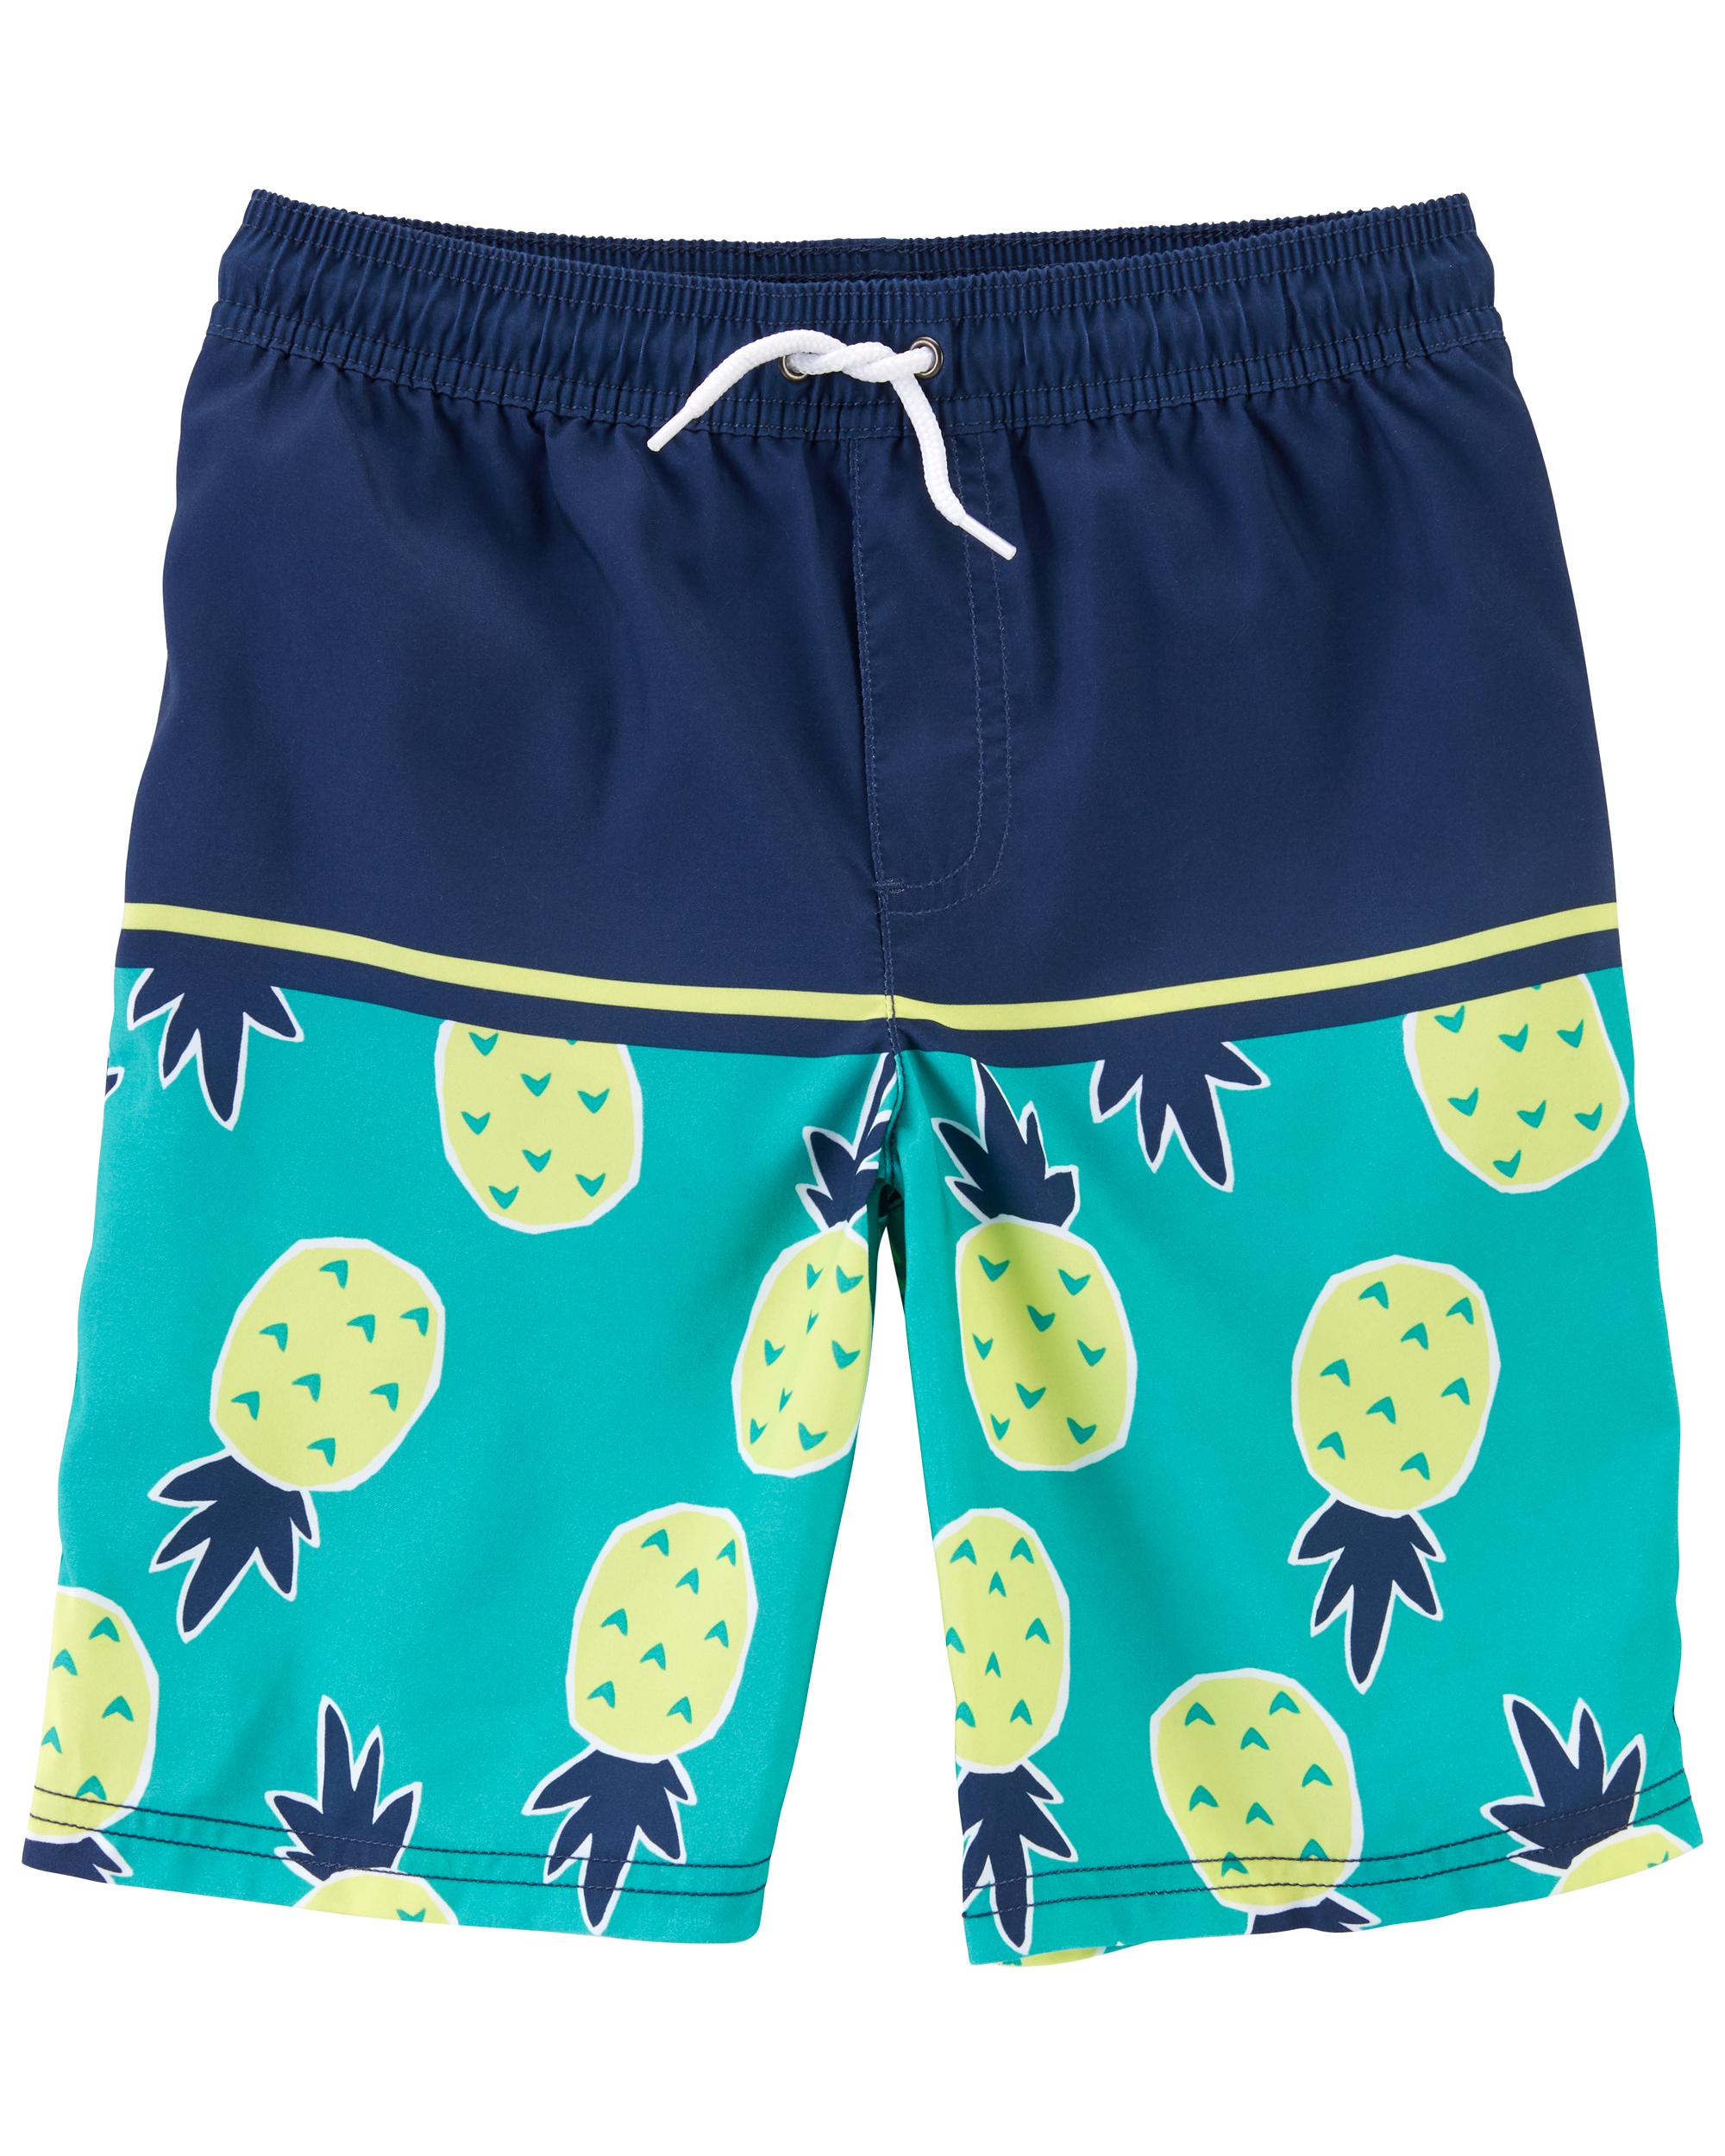 Looking for Family Matching Cool Stripes Pineapple Swimwear Sale